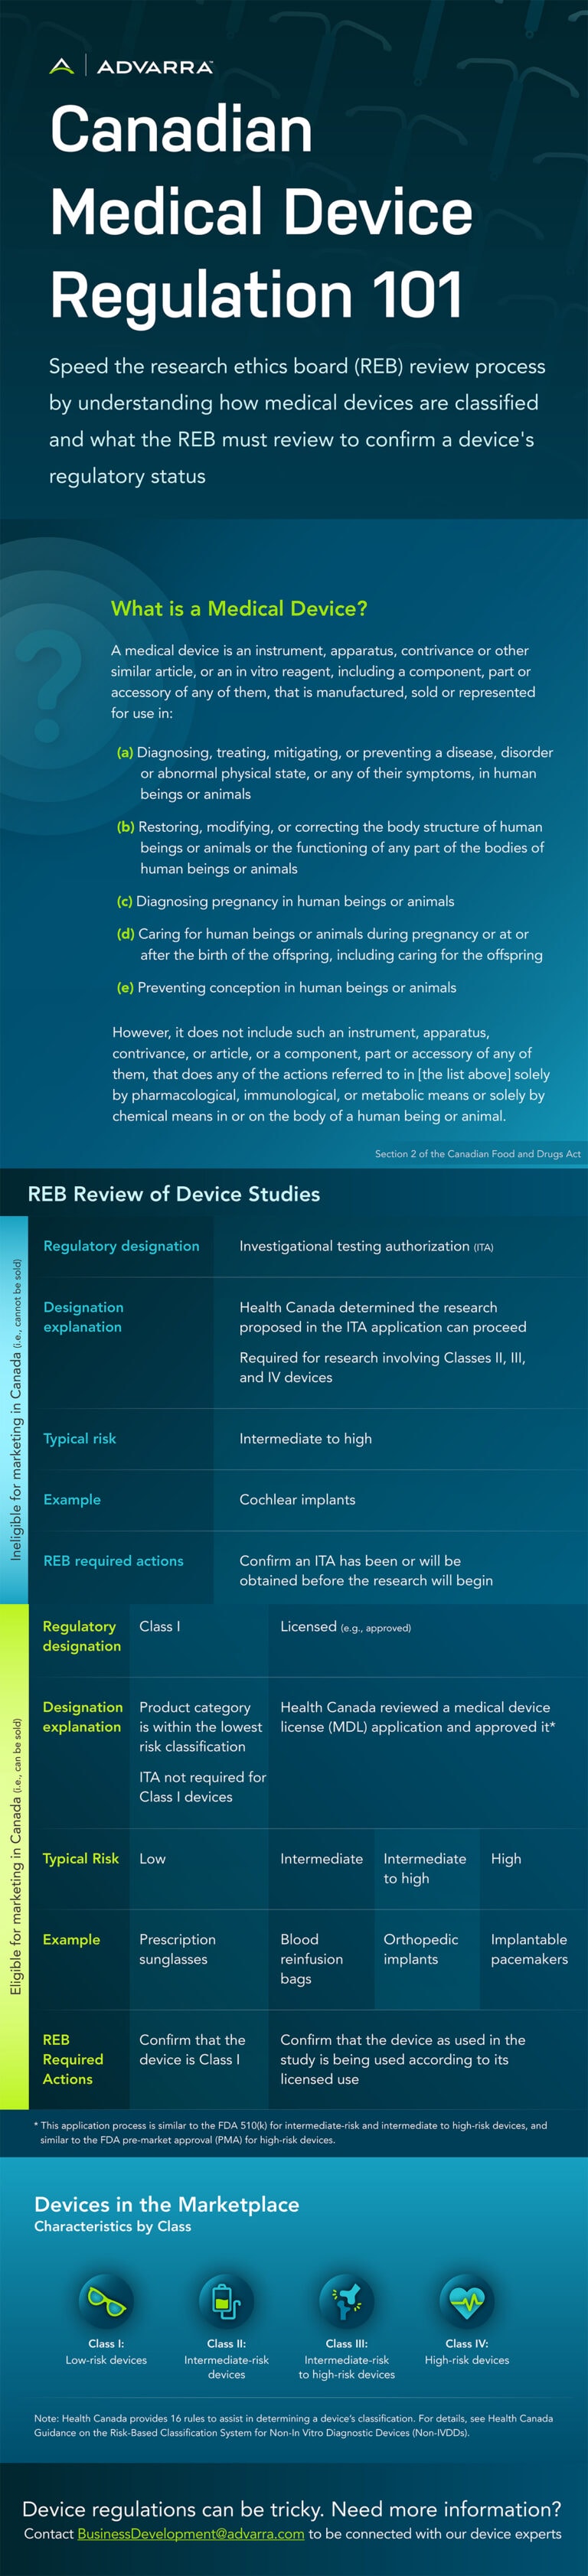 Infographic for Canadian Medical Device Regulation 101 (full text below)